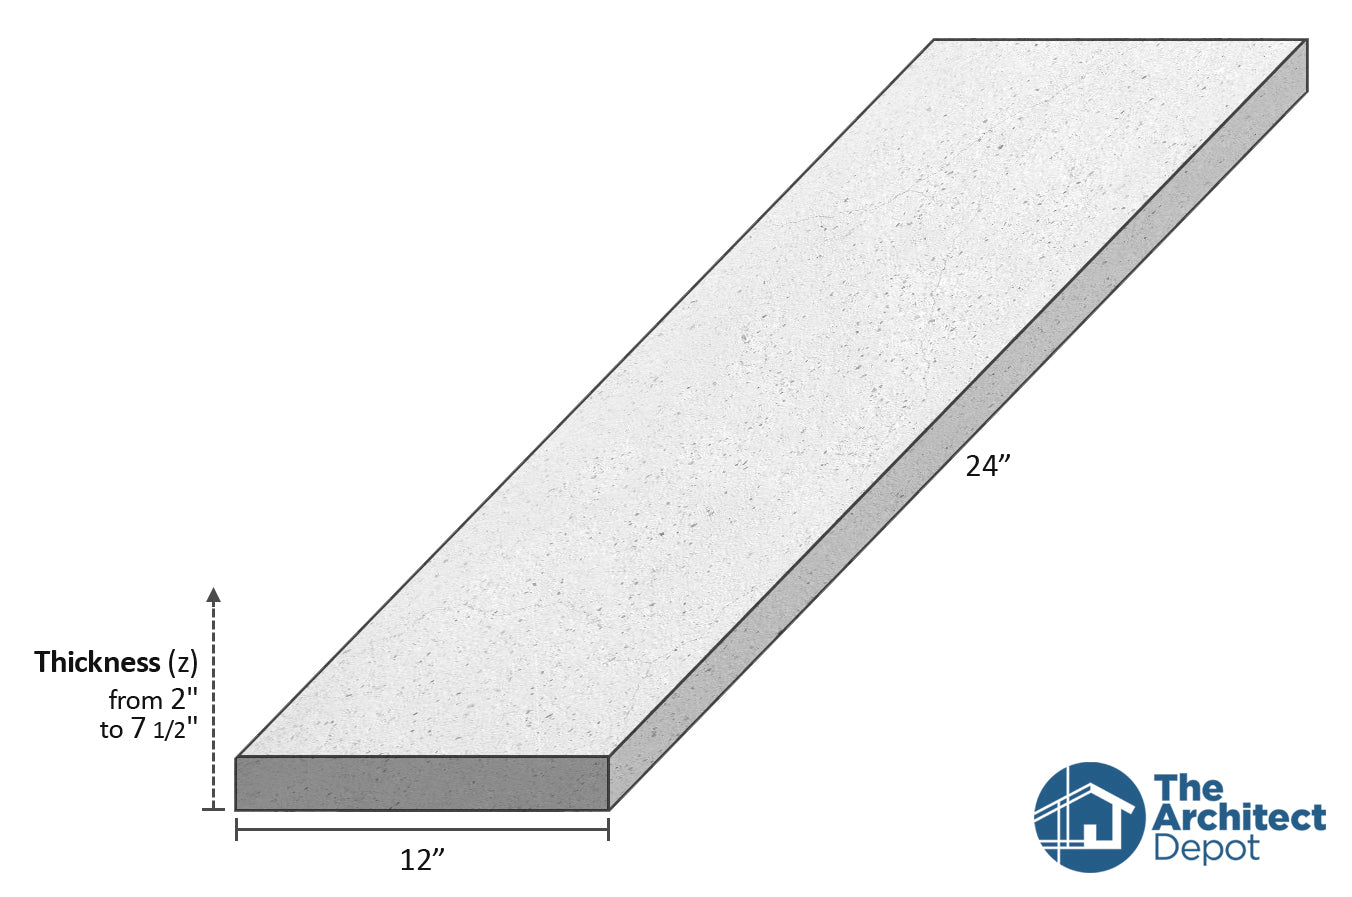 decorative concrete flat band moulding 24 x 12 use the decorative flat band moulding as an exterior moulding and give volume to the architecture of your building concrete flat bands can be use as a exterior window sill or exterior window trim as a simple crown molding decoration 